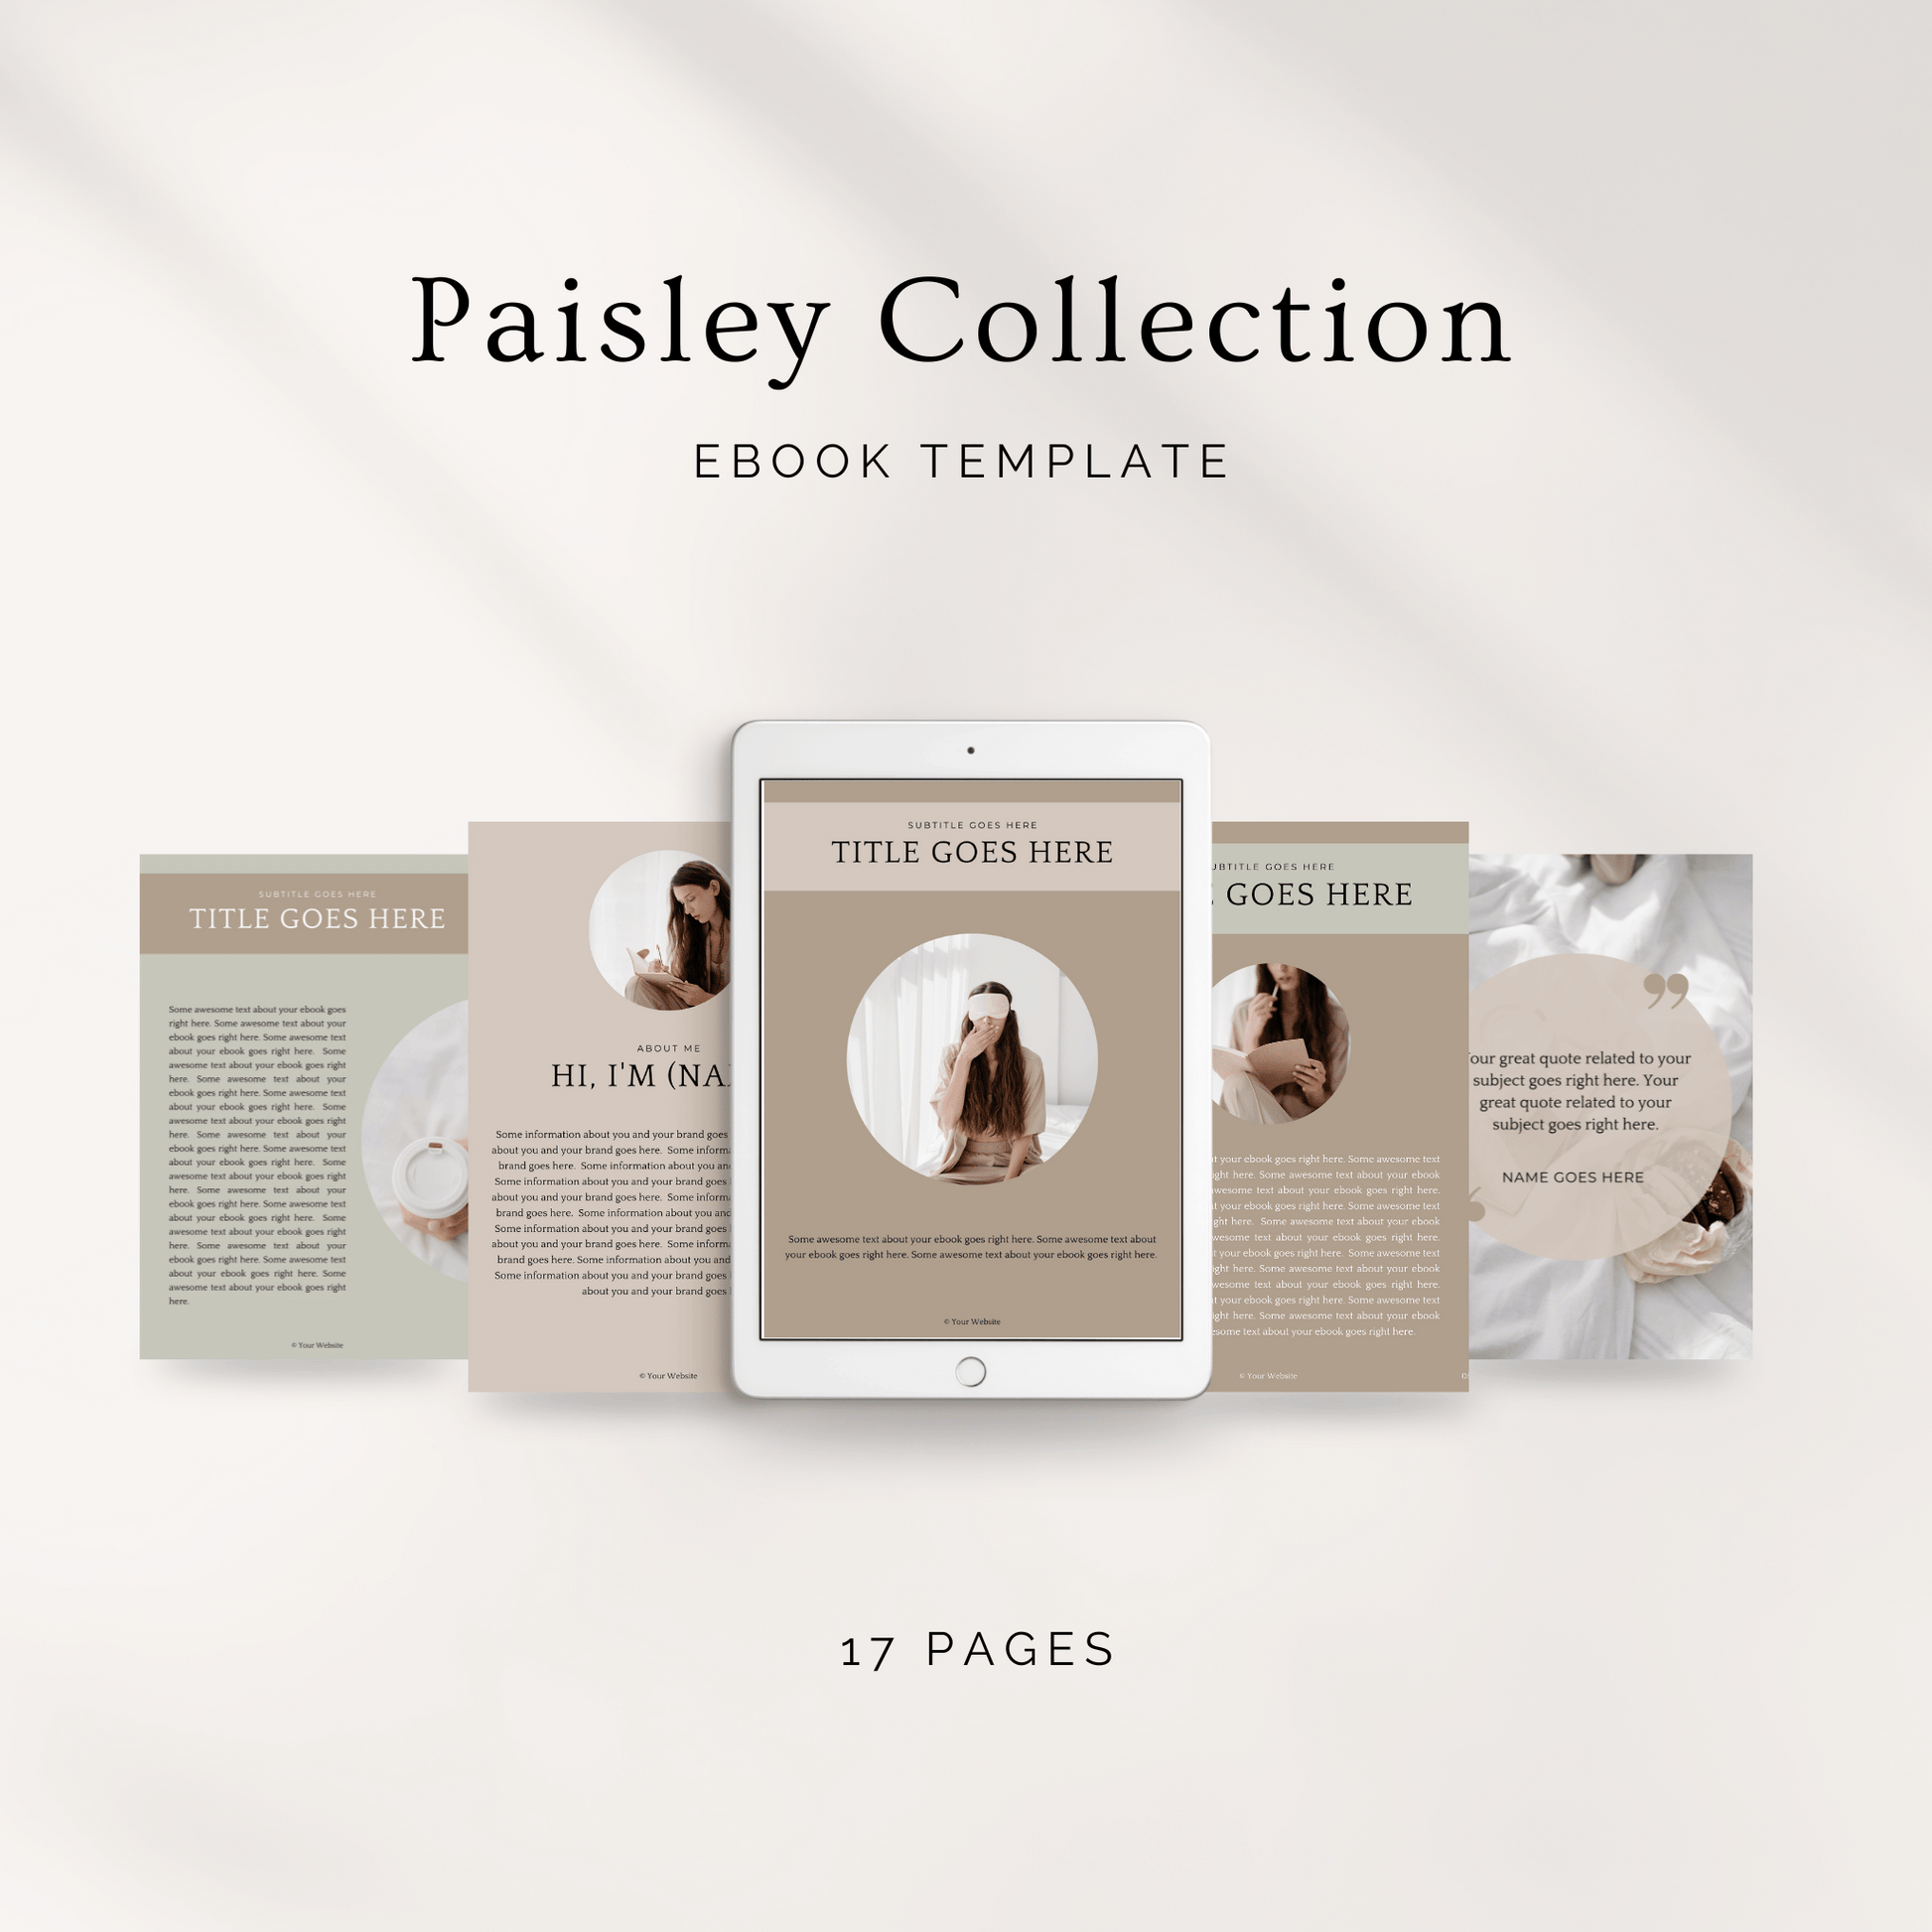 Neutral and earthy Bundle Collection of Canva Templates. Ebook, Workbook, Presentation Slide Deck and Product Mockup Canva templates for female entrepreneurs.